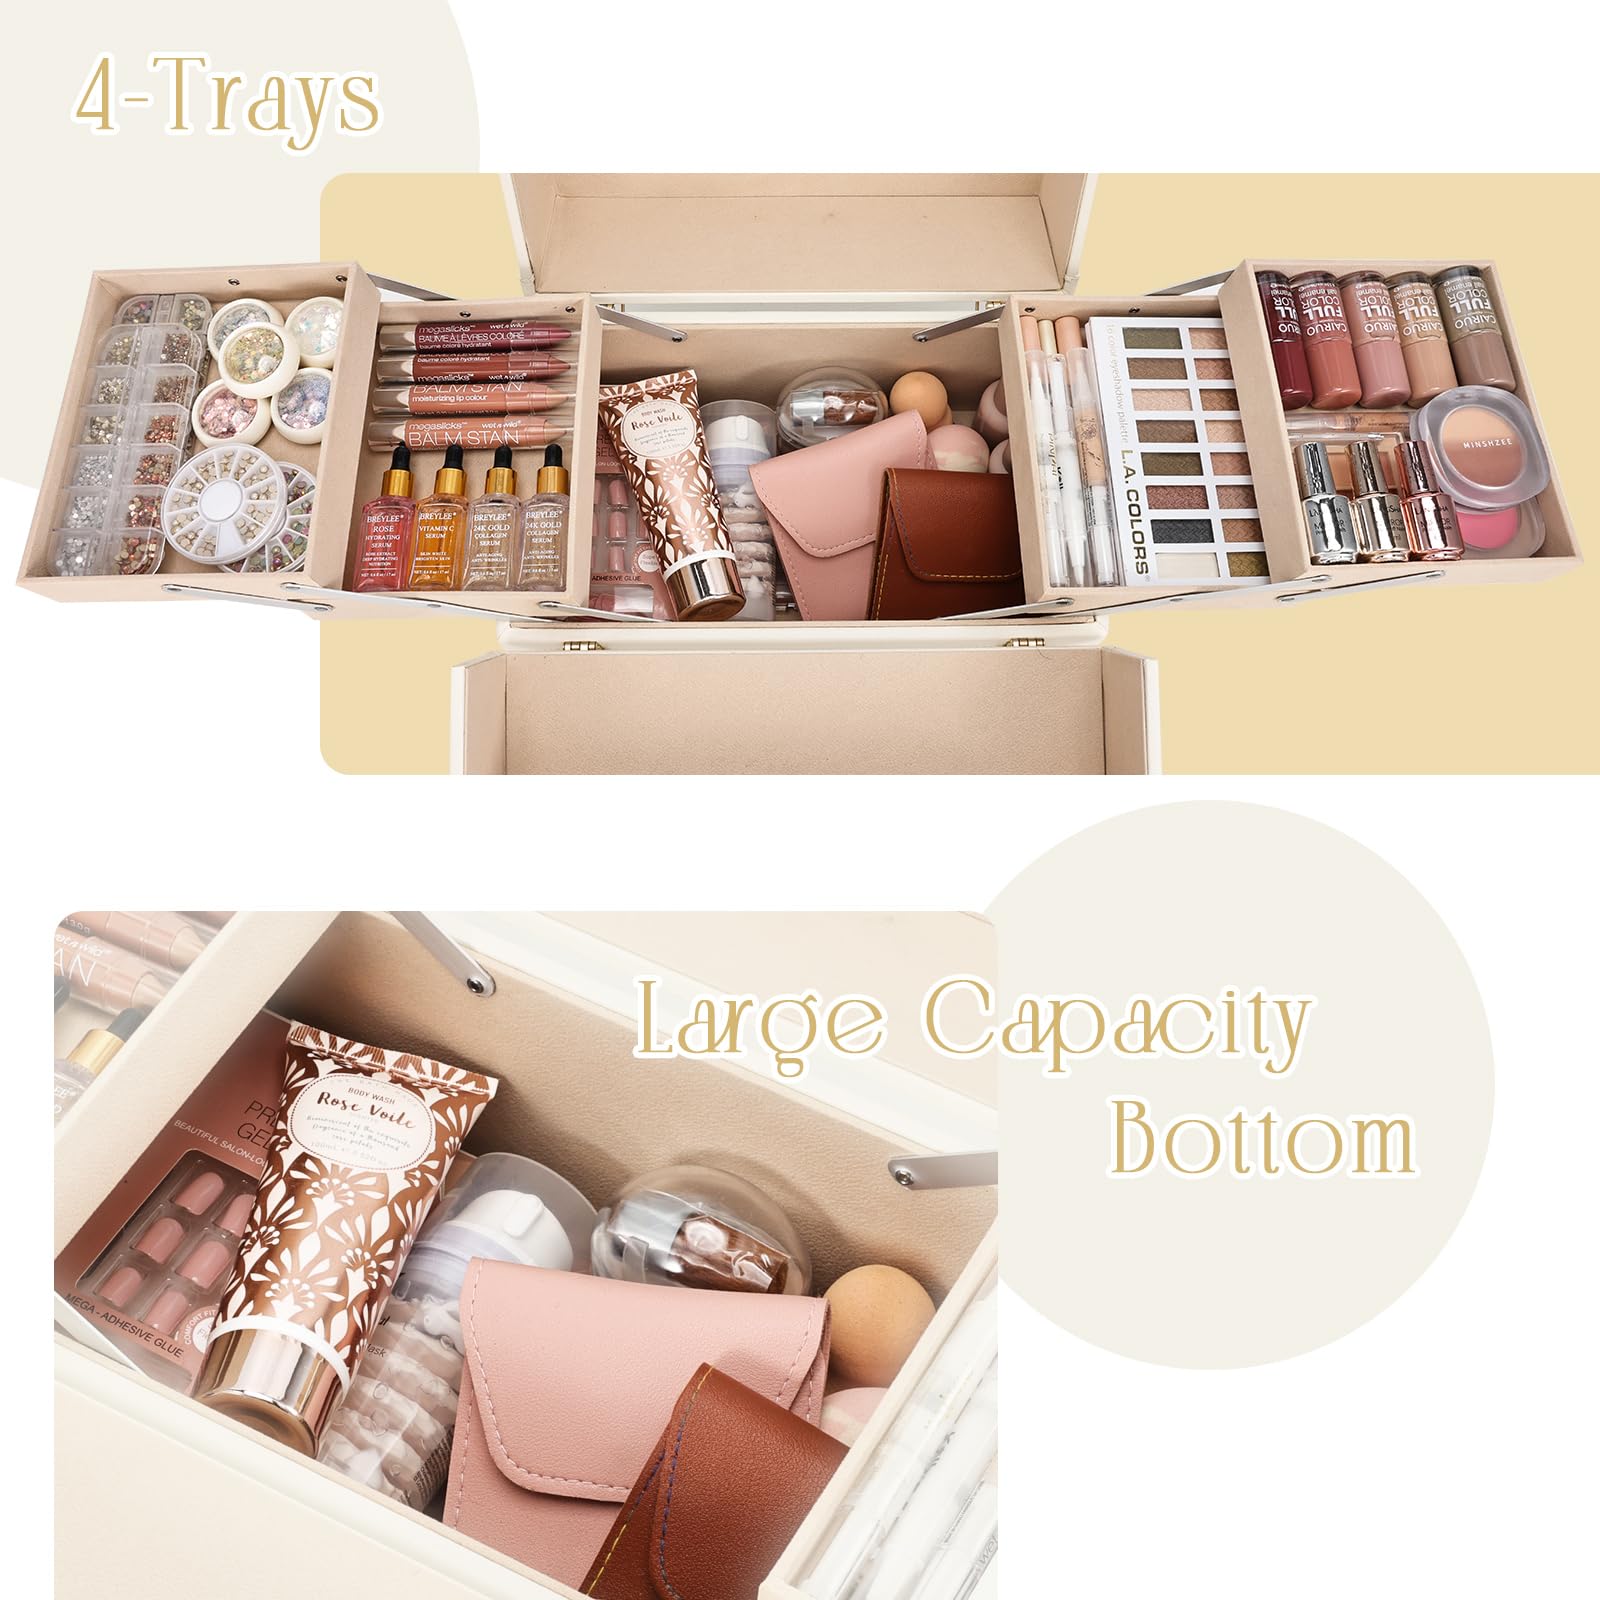 Joligrace Makeup Train Case Large Portable Cosmetic Makeup Storage Box Organizer Lockable with 4 Tray Compartments Retro Champagne Beige Vegan Leather